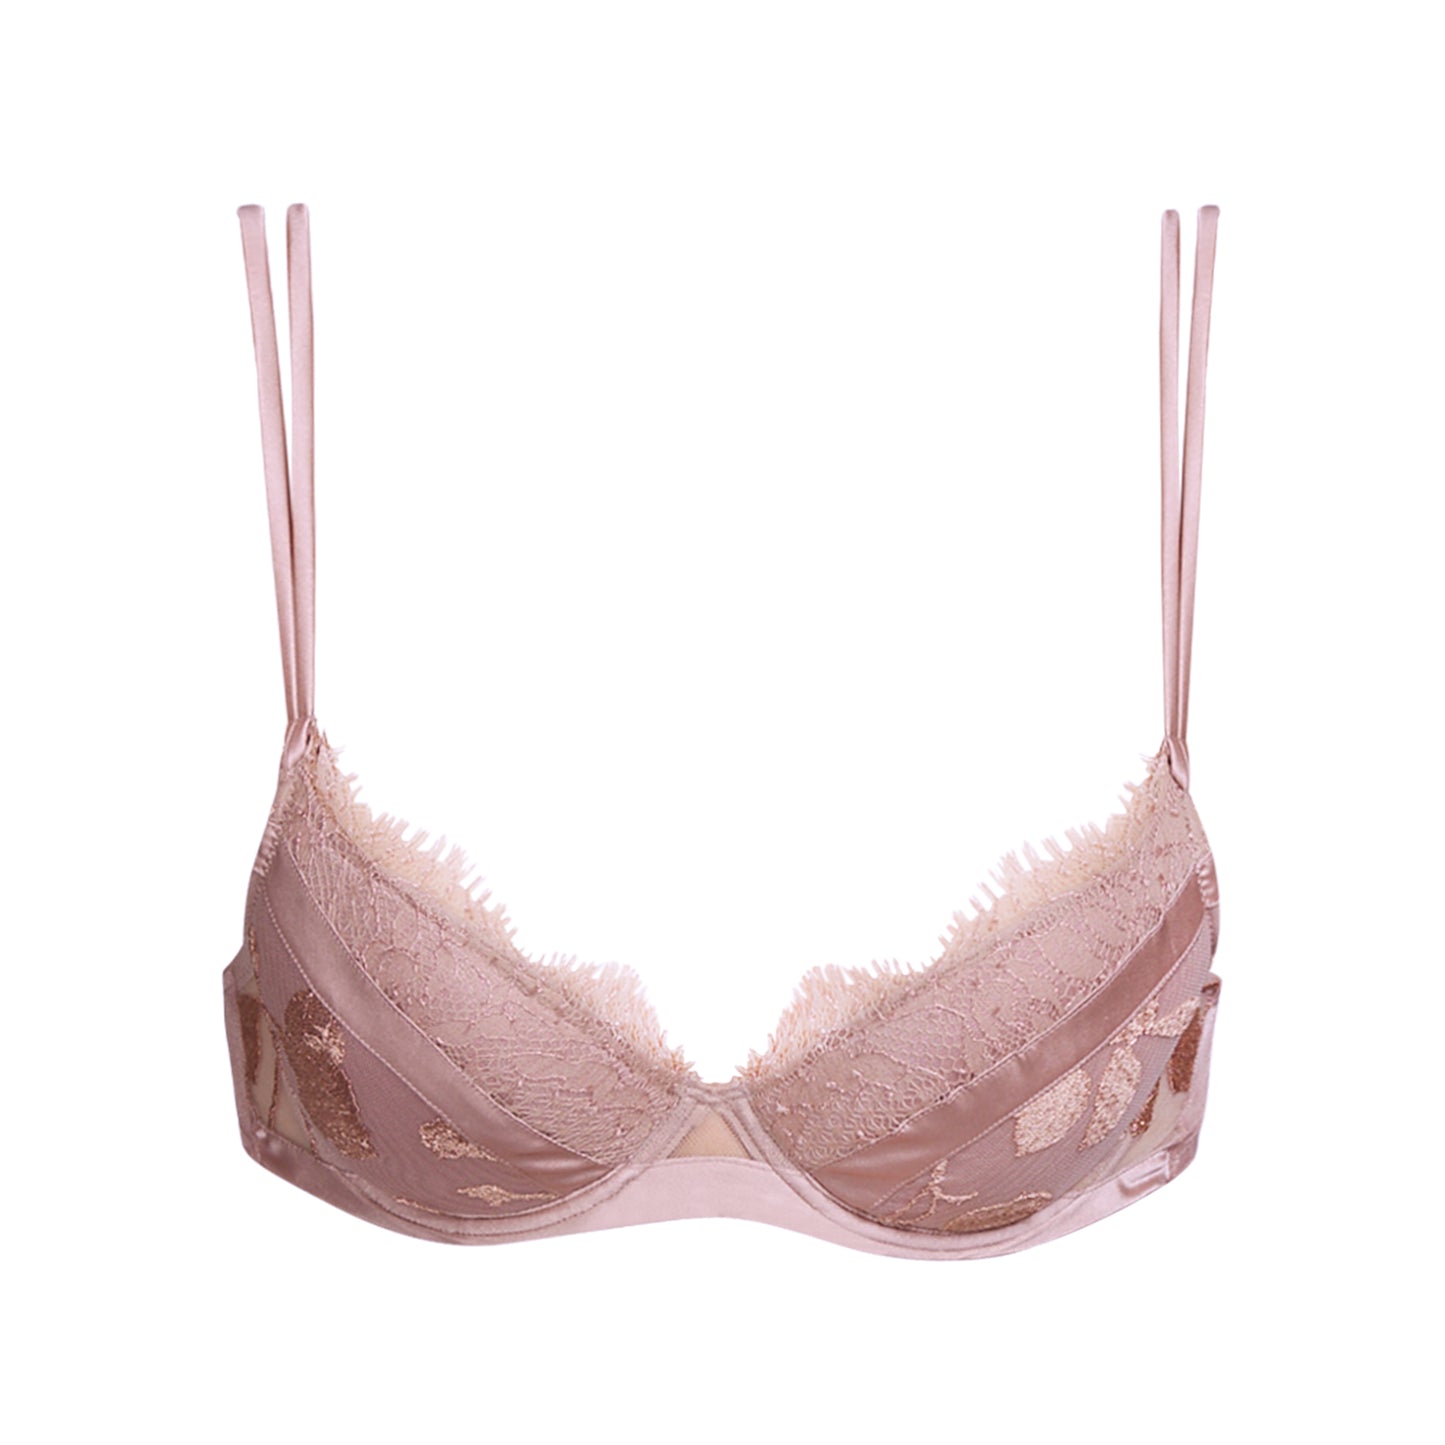 Andres Sarda Franklin push-up bh uitneembare pads make-up